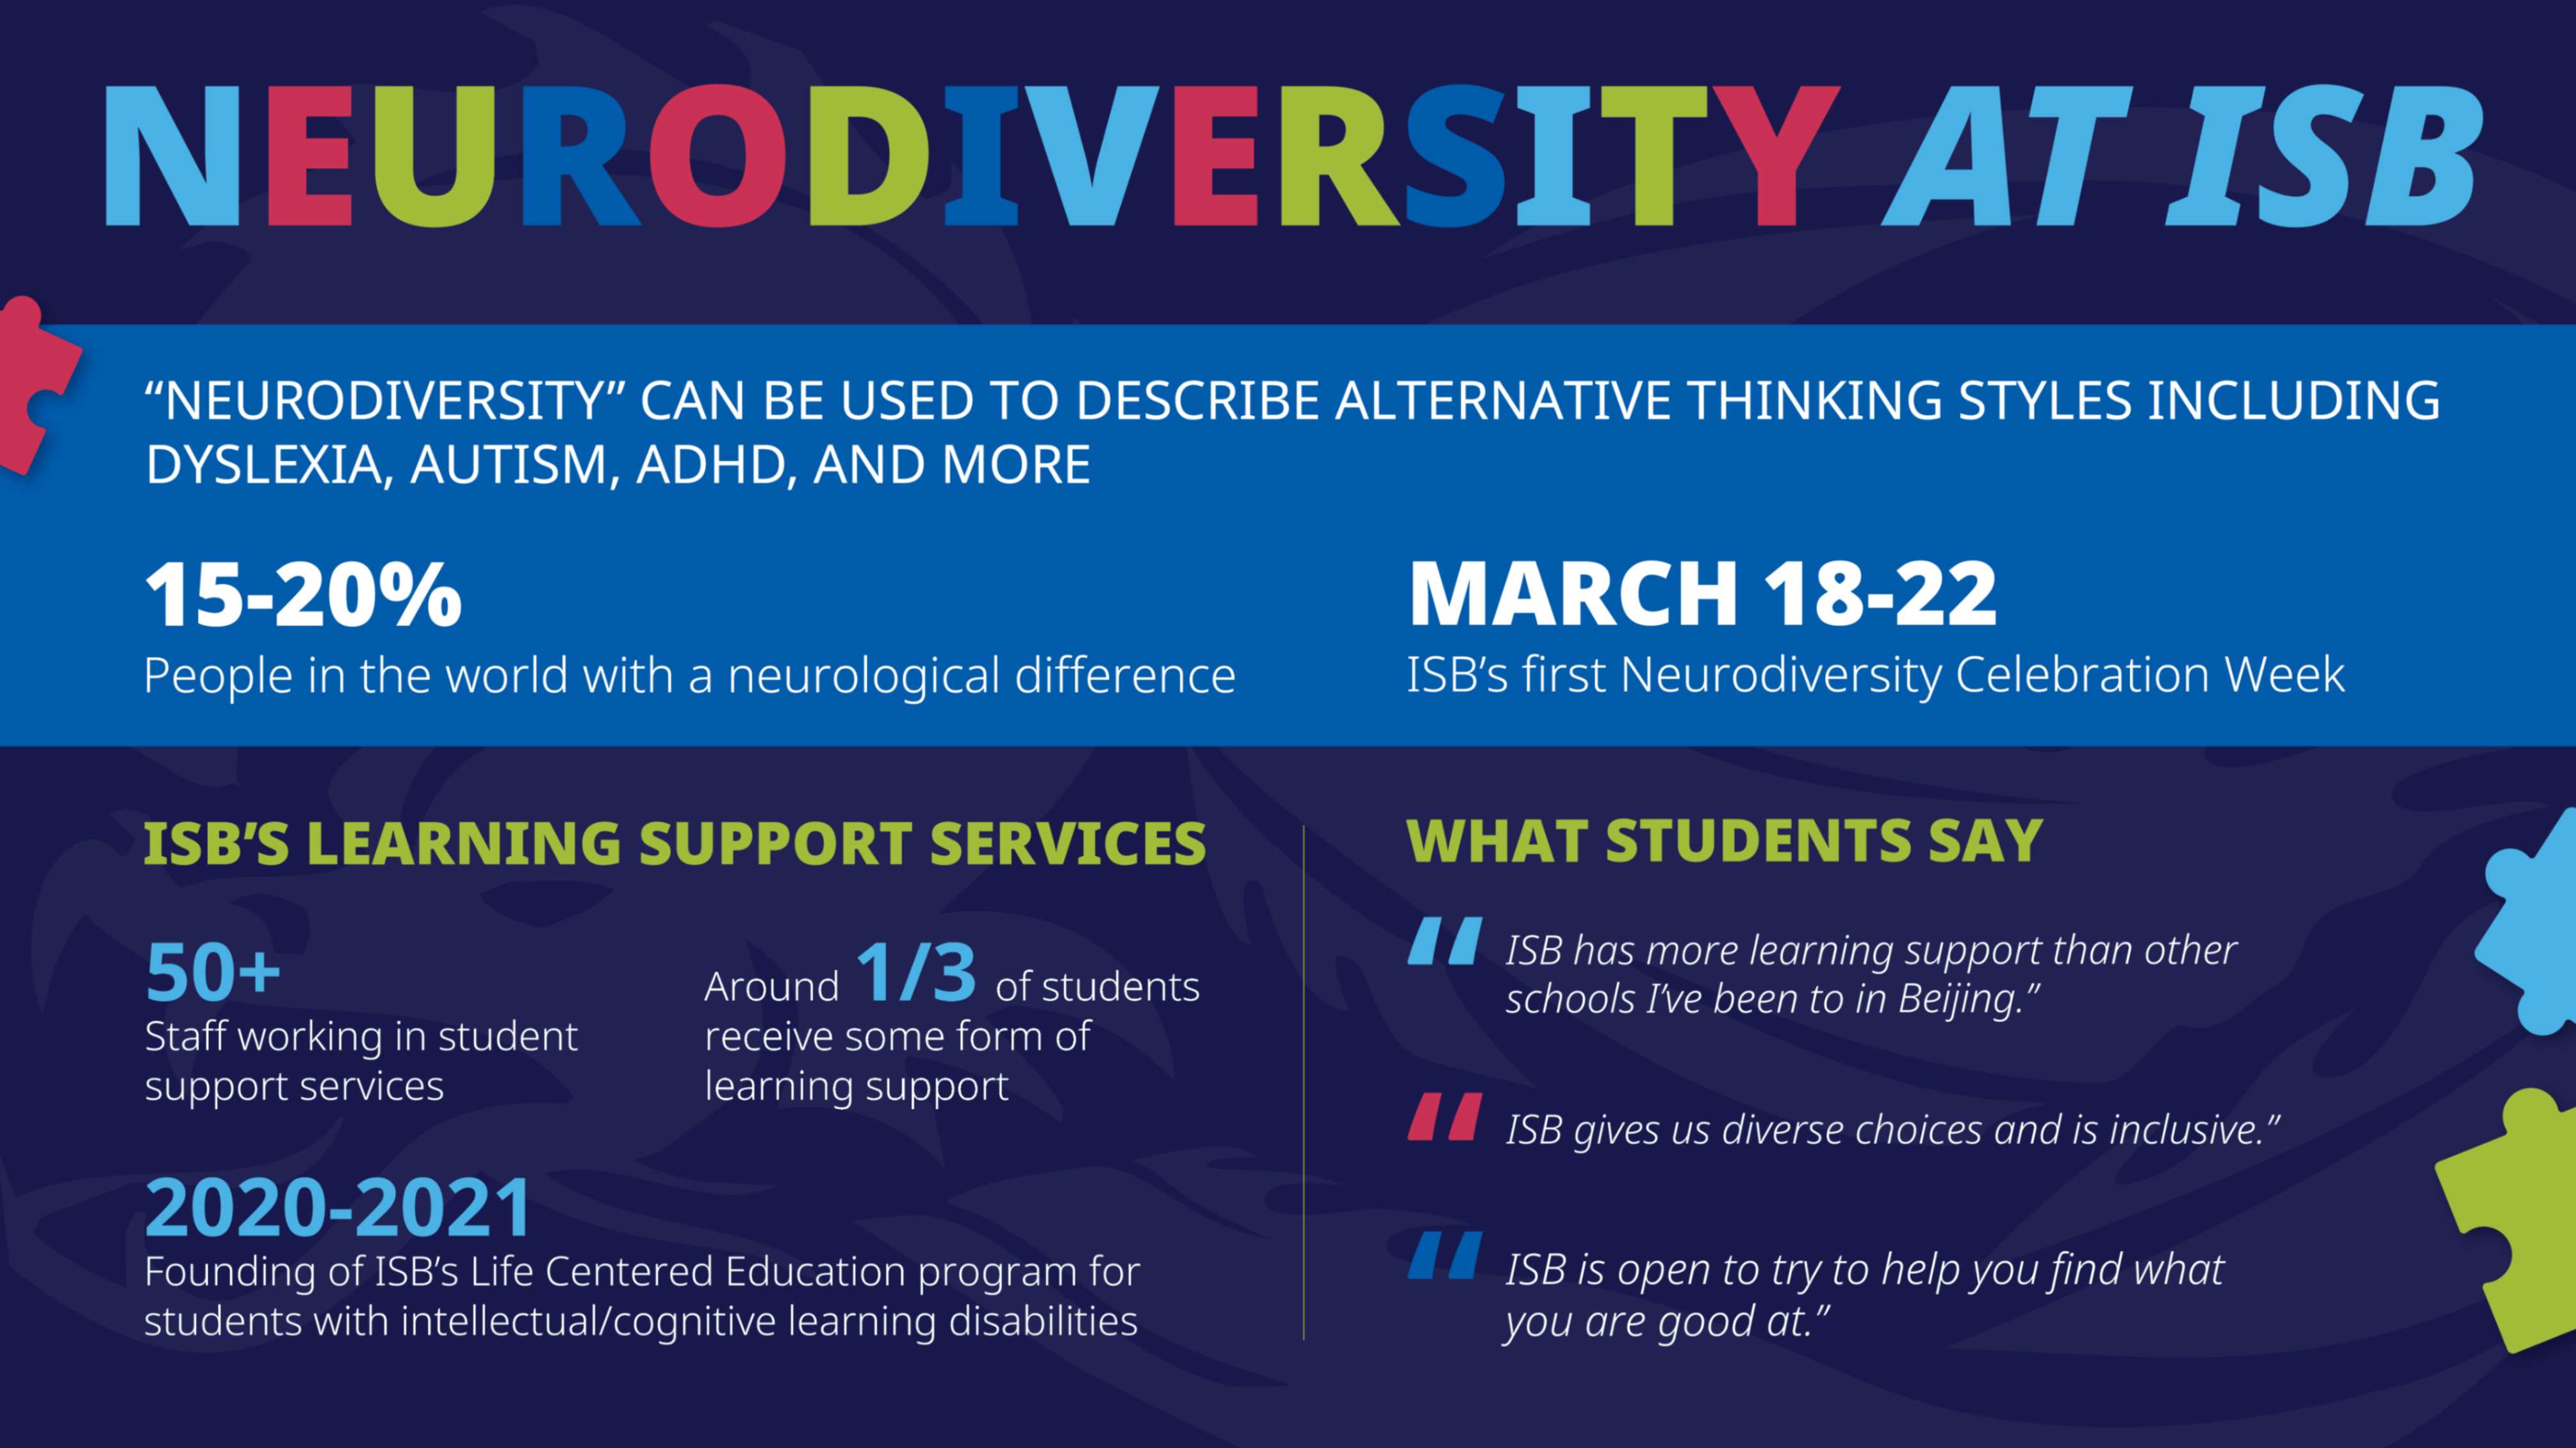 Infographic showing facts and figures related to neurodiversity at ISB